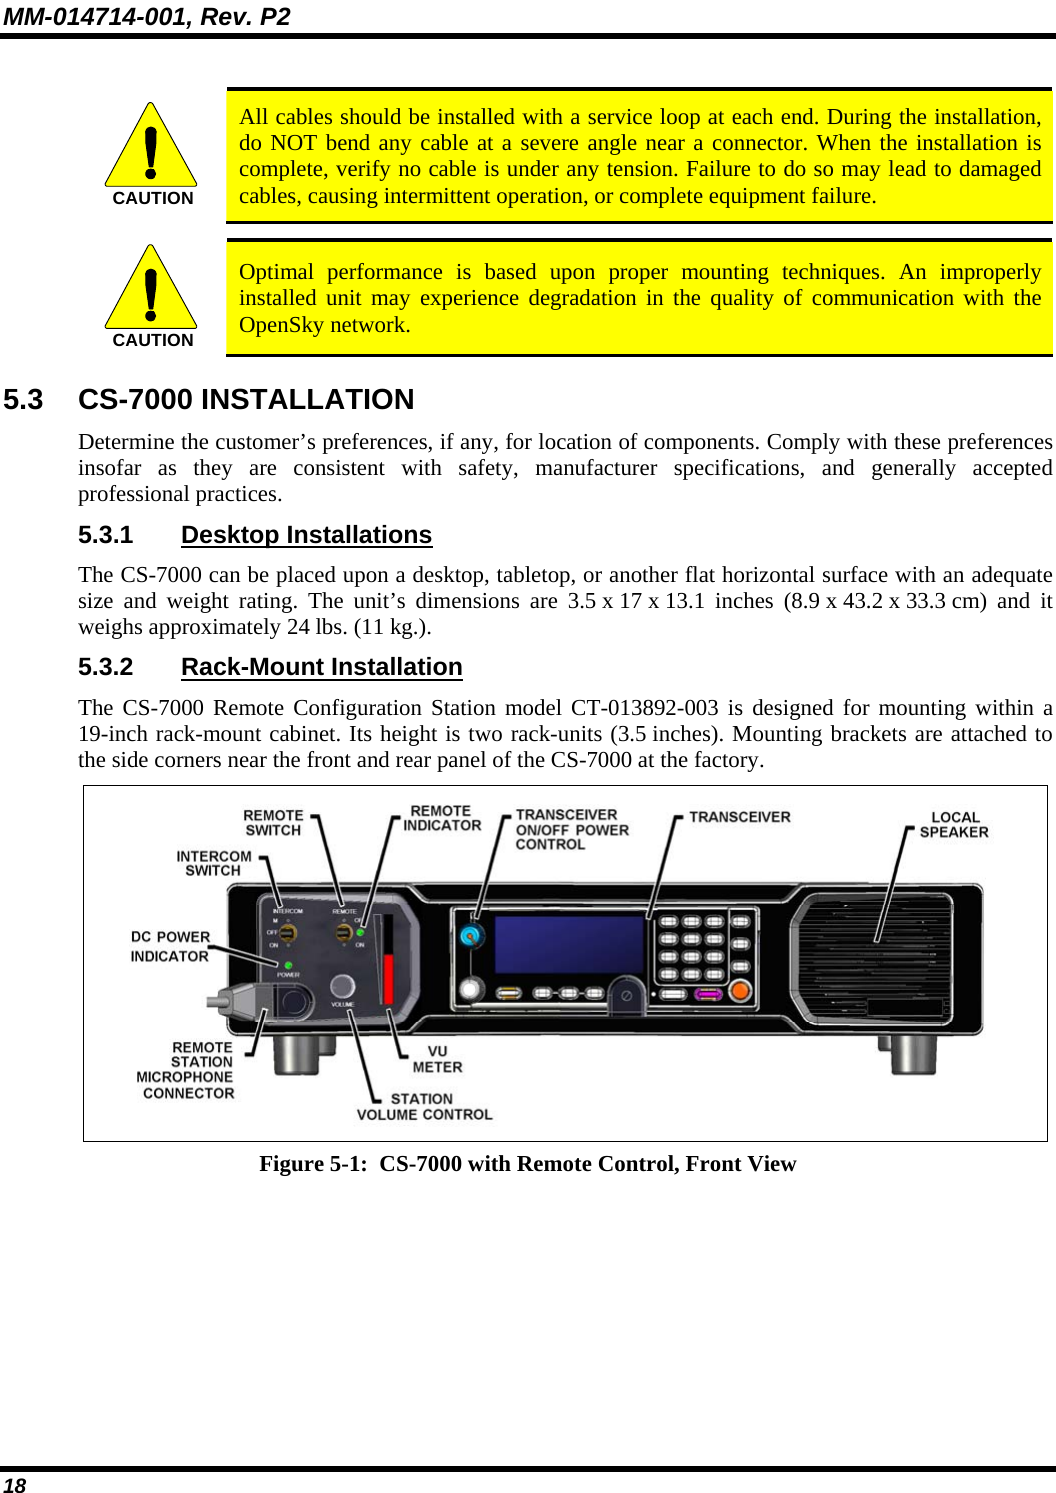 MM-014714-001, Rev. P2 18  CAUTION  All cables should be installed with a service loop at each end. During the installation, do NOT bend any cable at a severe angle near a connector. When the installation is complete, verify no cable is under any tension. Failure to do so may lead to damaged cables, causing intermittent operation, or complete equipment failure.  CAUTION  Optimal performance is based upon proper mounting techniques. An improperly installed unit may experience degradation in the quality of communication with the OpenSky network. 5.3 CS-7000 INSTALLATION Determine the customer’s preferences, if any, for location of components. Comply with these preferences insofar as they are consistent with safety, manufacturer specifications, and generally accepted professional practices. 5.3.1 Desktop Installations The CS-7000 can be placed upon a desktop, tabletop, or another flat horizontal surface with an adequate size and weight rating. The unit’s dimensions are 3.5 x 17 x 13.1 inches  (8.9 x 43.2 x 33.3 cm)  and  it weighs approximately 24 lbs. (11 kg.).   5.3.2 Rack-Mount Installation The CS-7000 Remote Configuration Station model CT-013892-003 is designed for mounting within a 19-inch rack-mount cabinet. Its height is two rack-units (3.5 inches). Mounting brackets are attached to the side corners near the front and rear panel of the CS-7000 at the factory.  Figure 5-1:  CS-7000 with Remote Control, Front View   